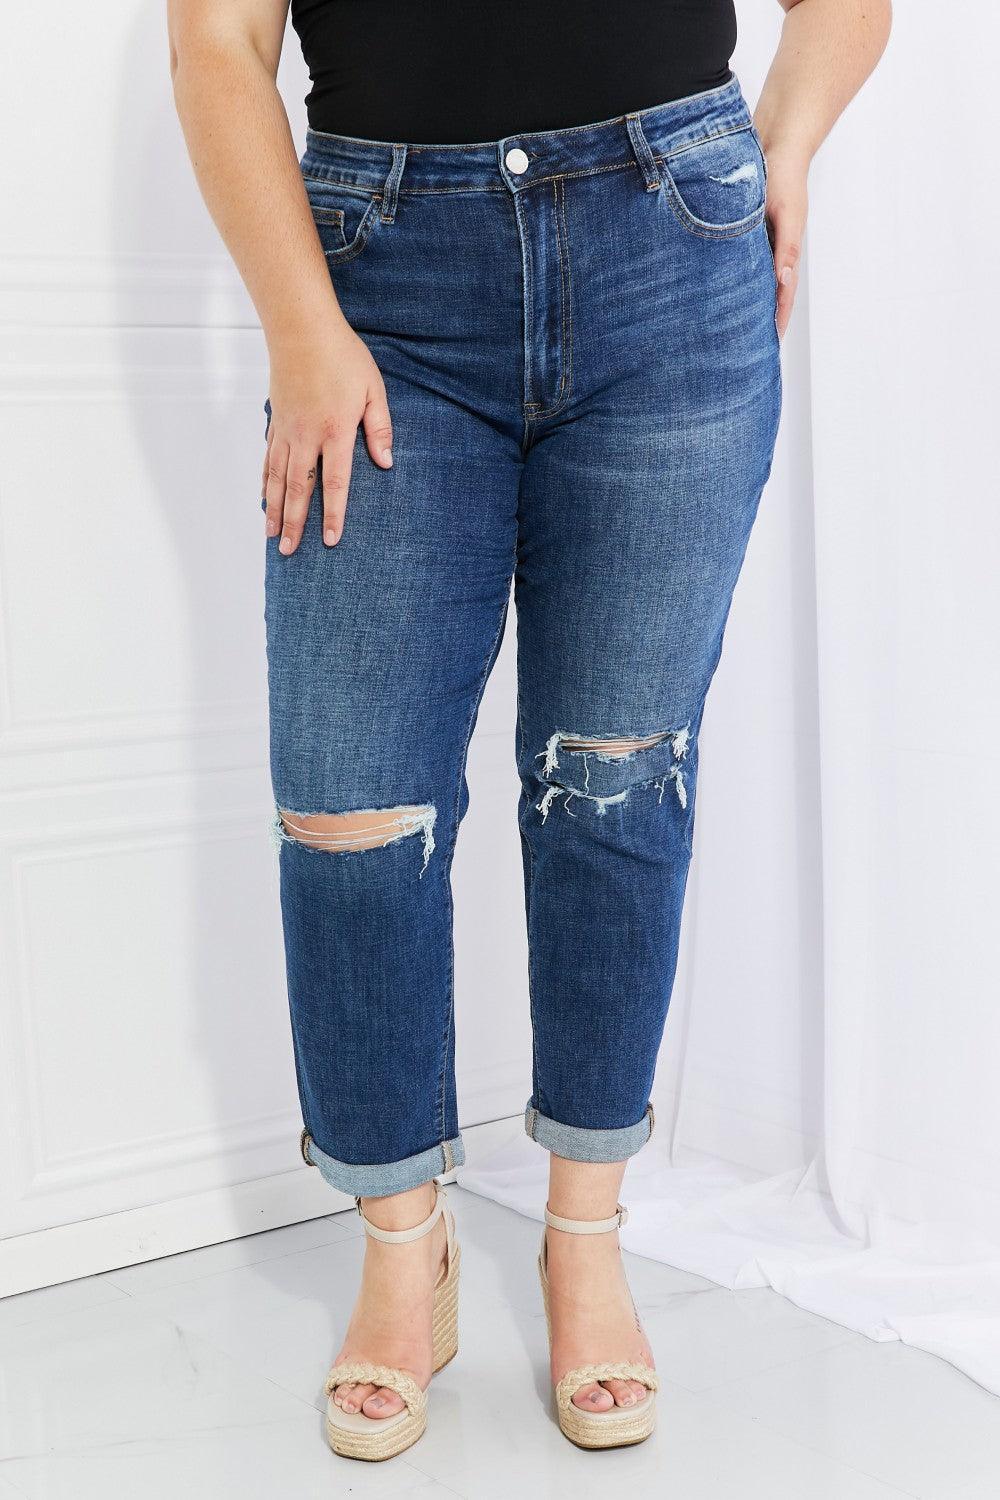 Plus Size Unflustered Distressed Cropped Jeans - MXSTUDIO.COM